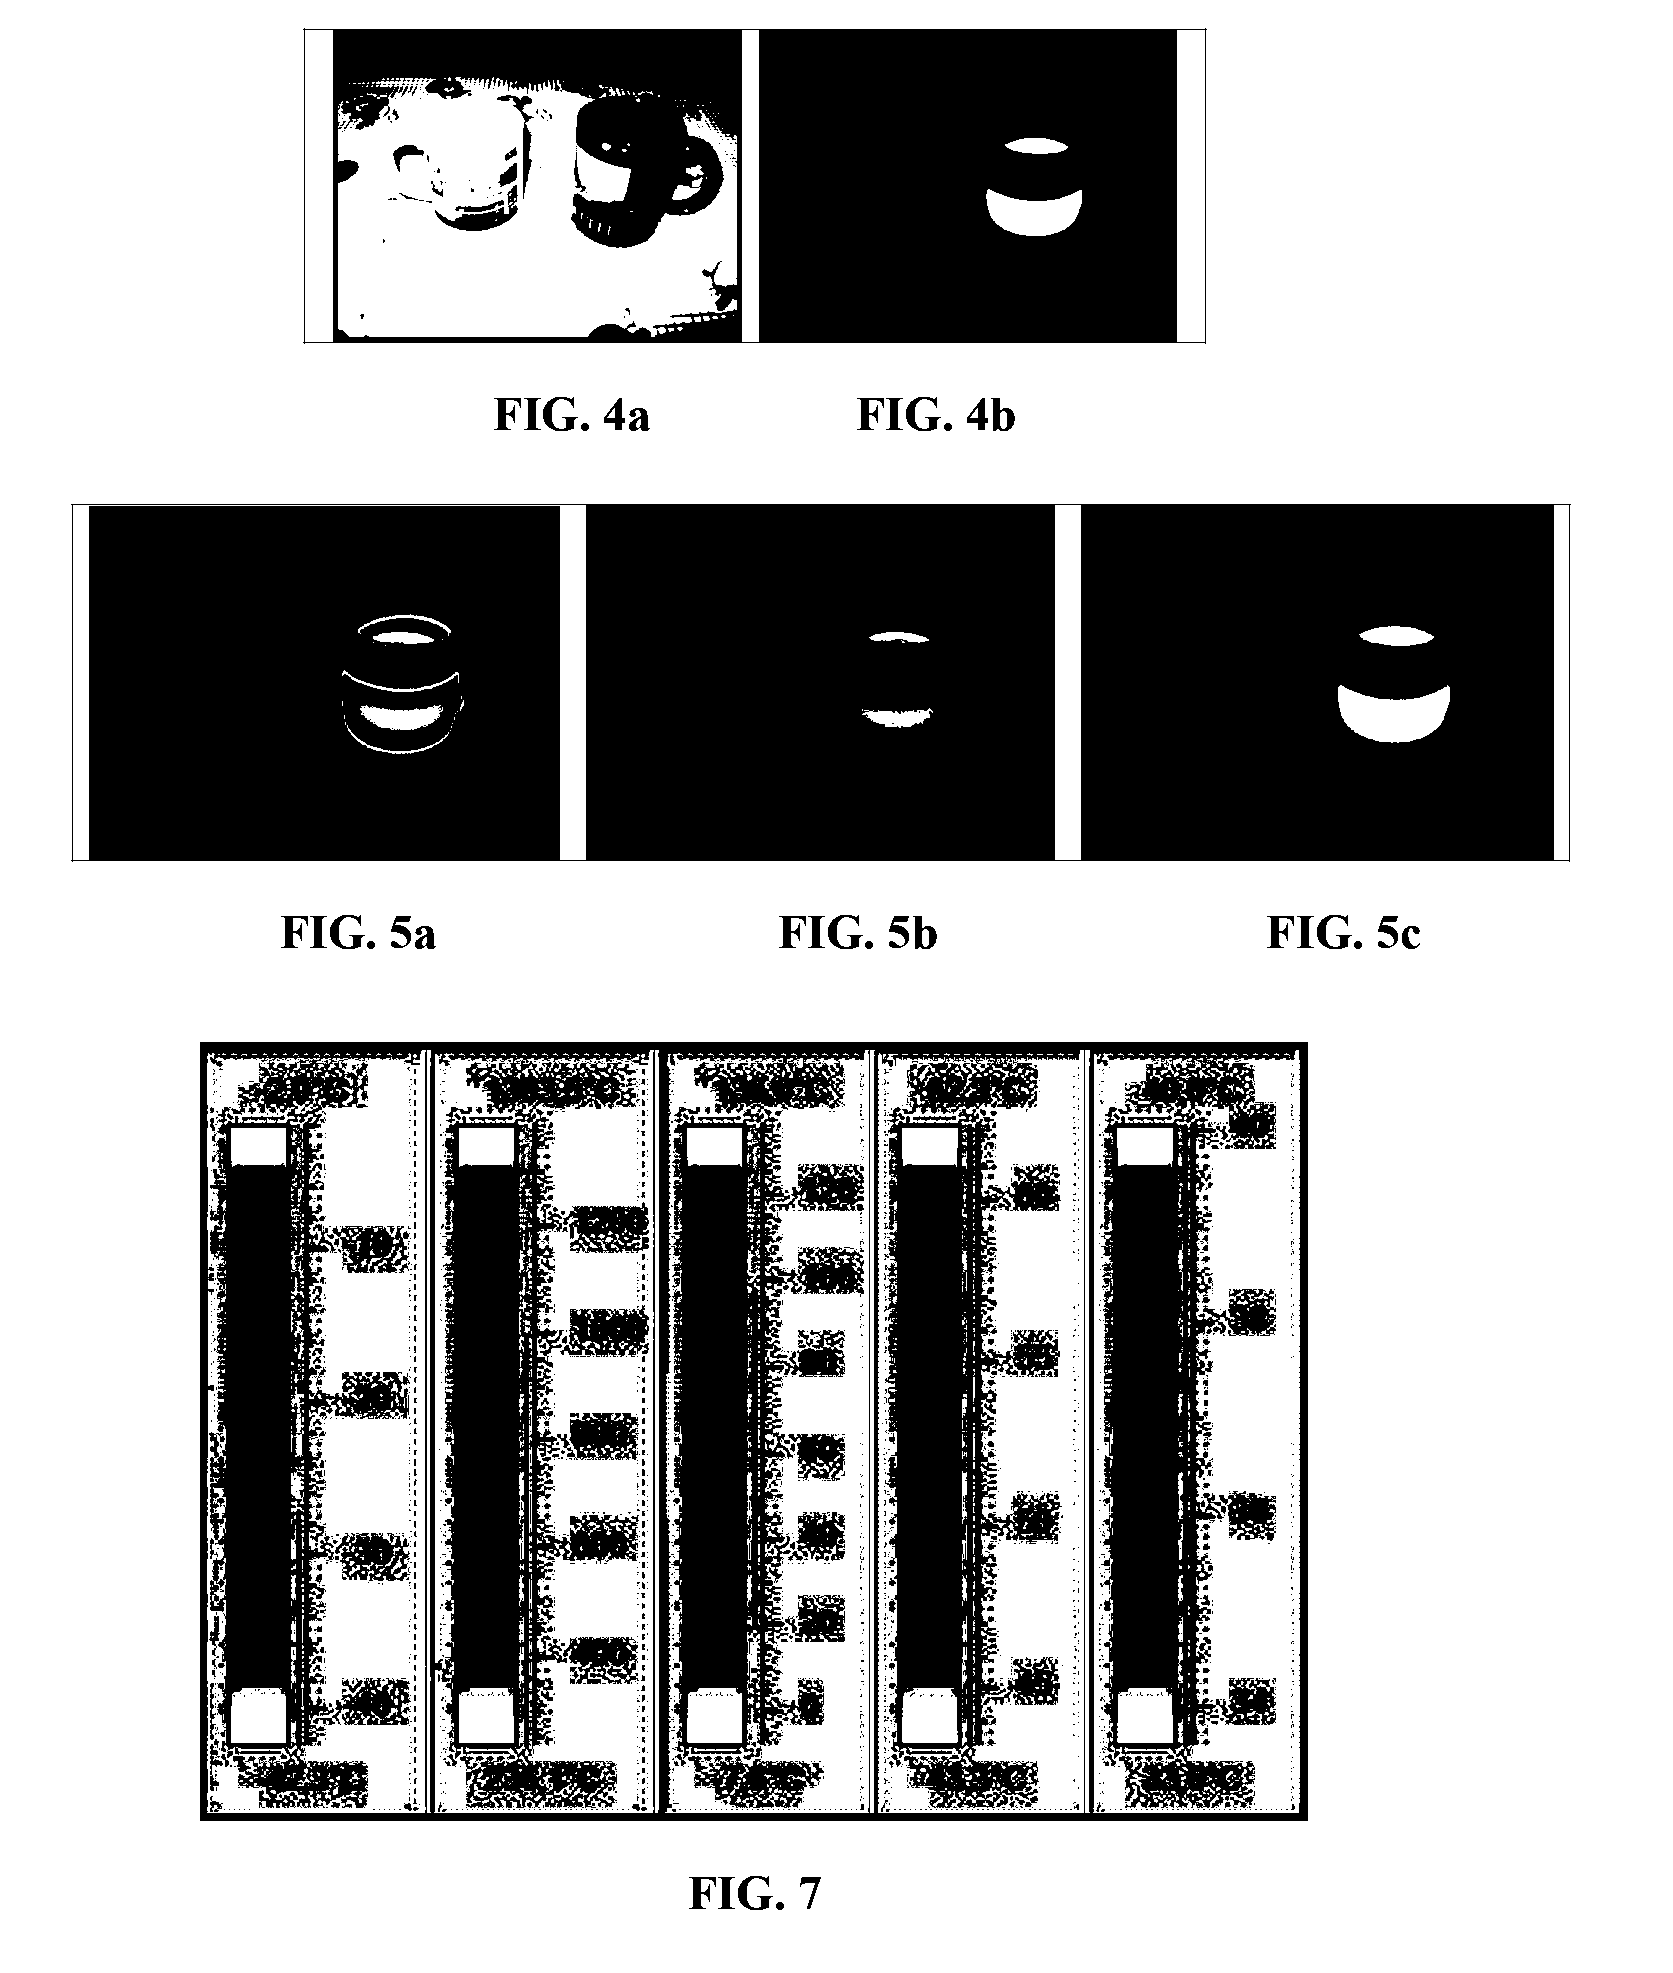 Method for improving visualization of infrared images